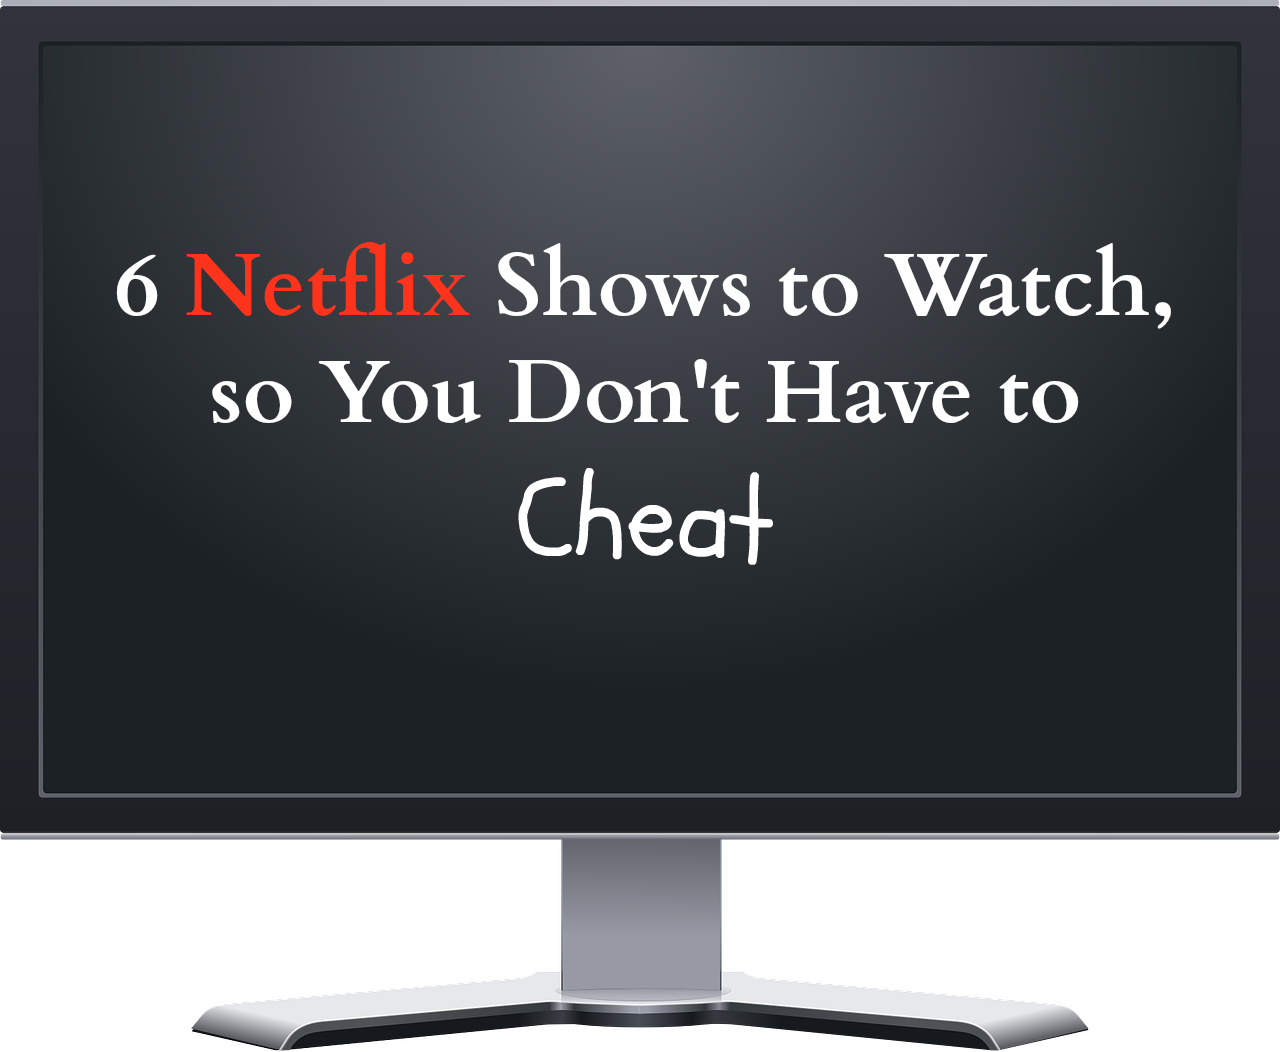 Netflix Shows to Watch so you don't have to Cheat